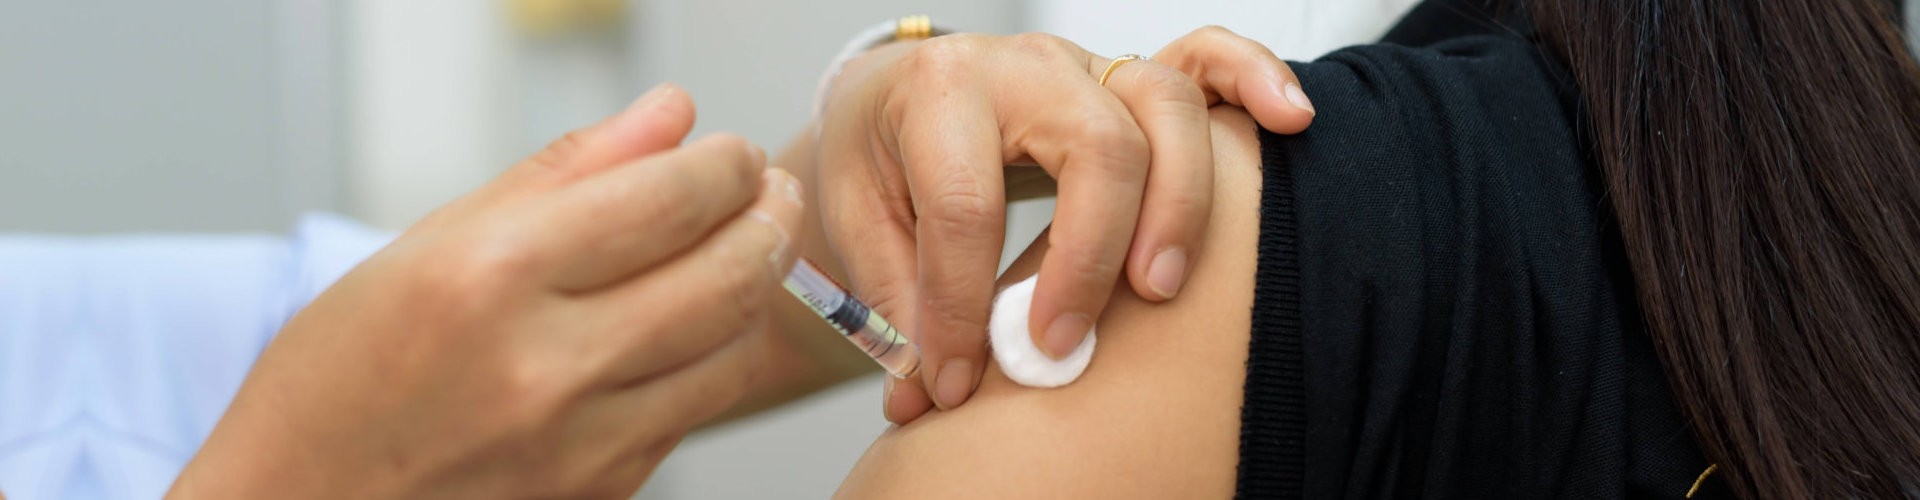 close up image of a woman getting her vaccine